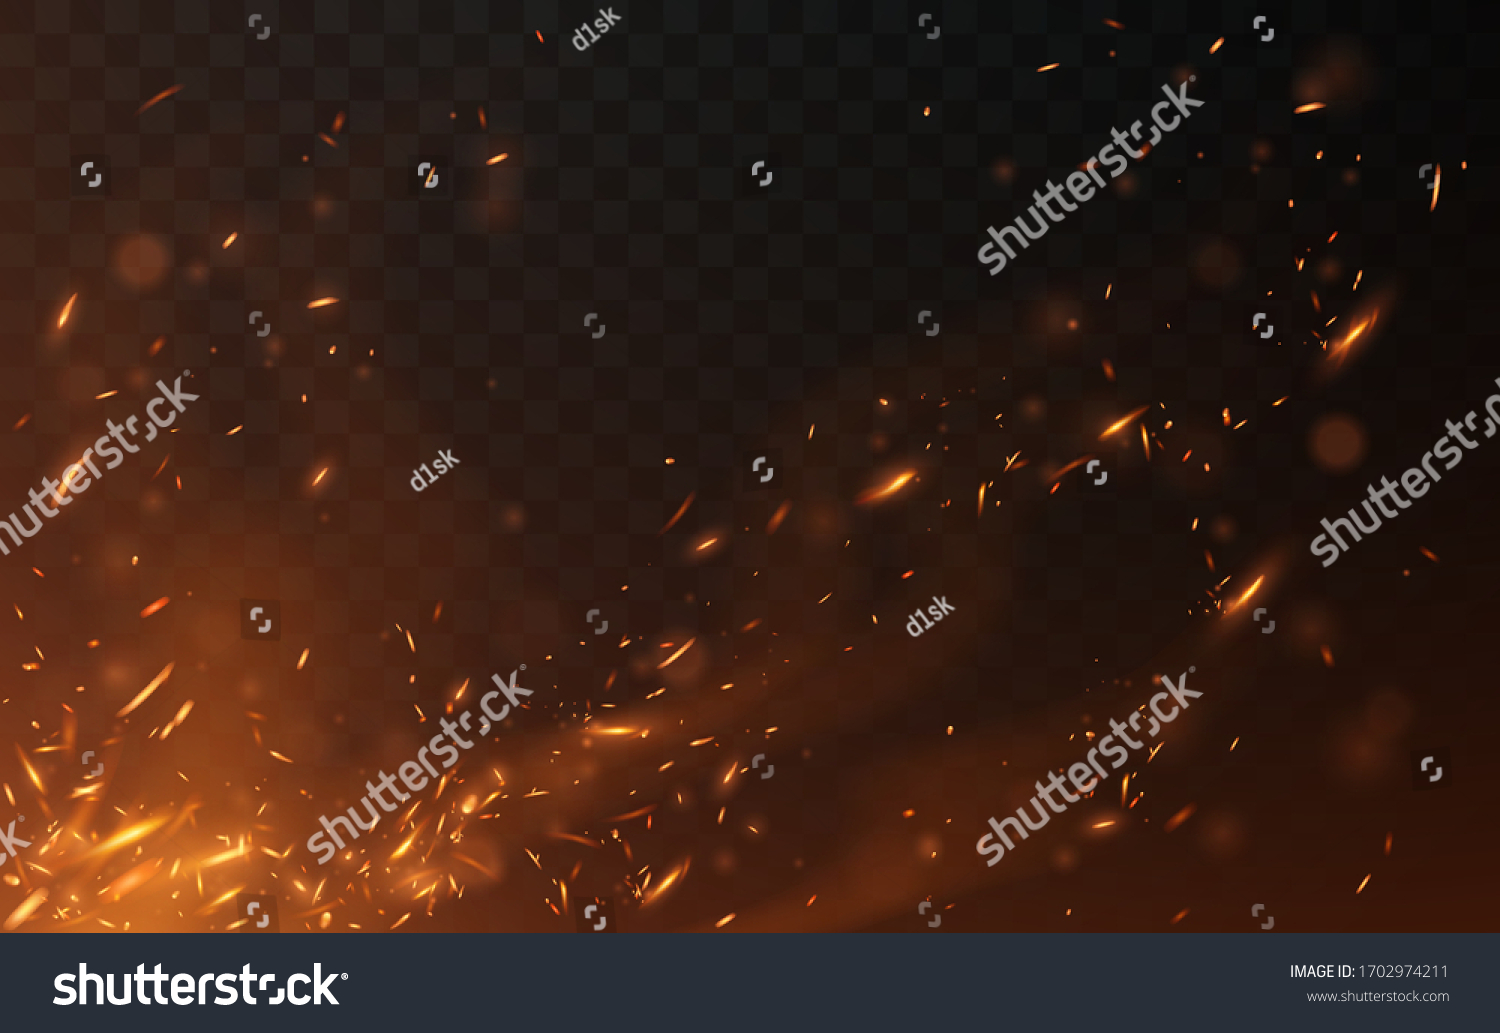 Flying fire sparks on checkered background #1702974211